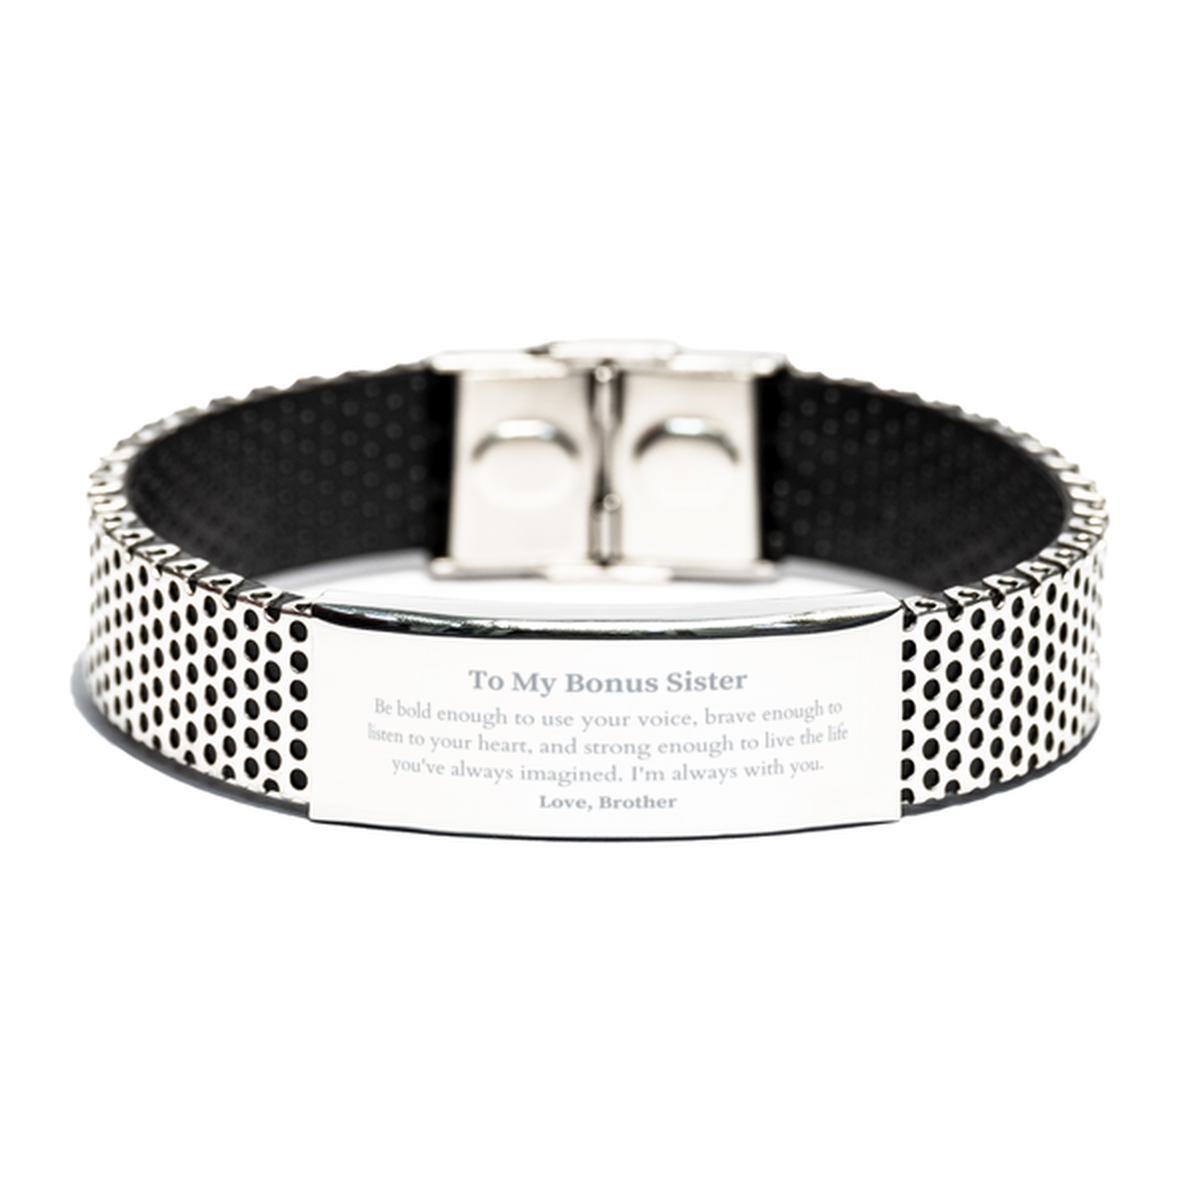 Keepsake Bonus Sister Stainless Steel Bracelet Gift Idea Graduation Christmas Birthday Bonus Sister from Brother, Bonus Sister Be bold enough to use your voice, brave enough to listen to your heart. Love, Brother